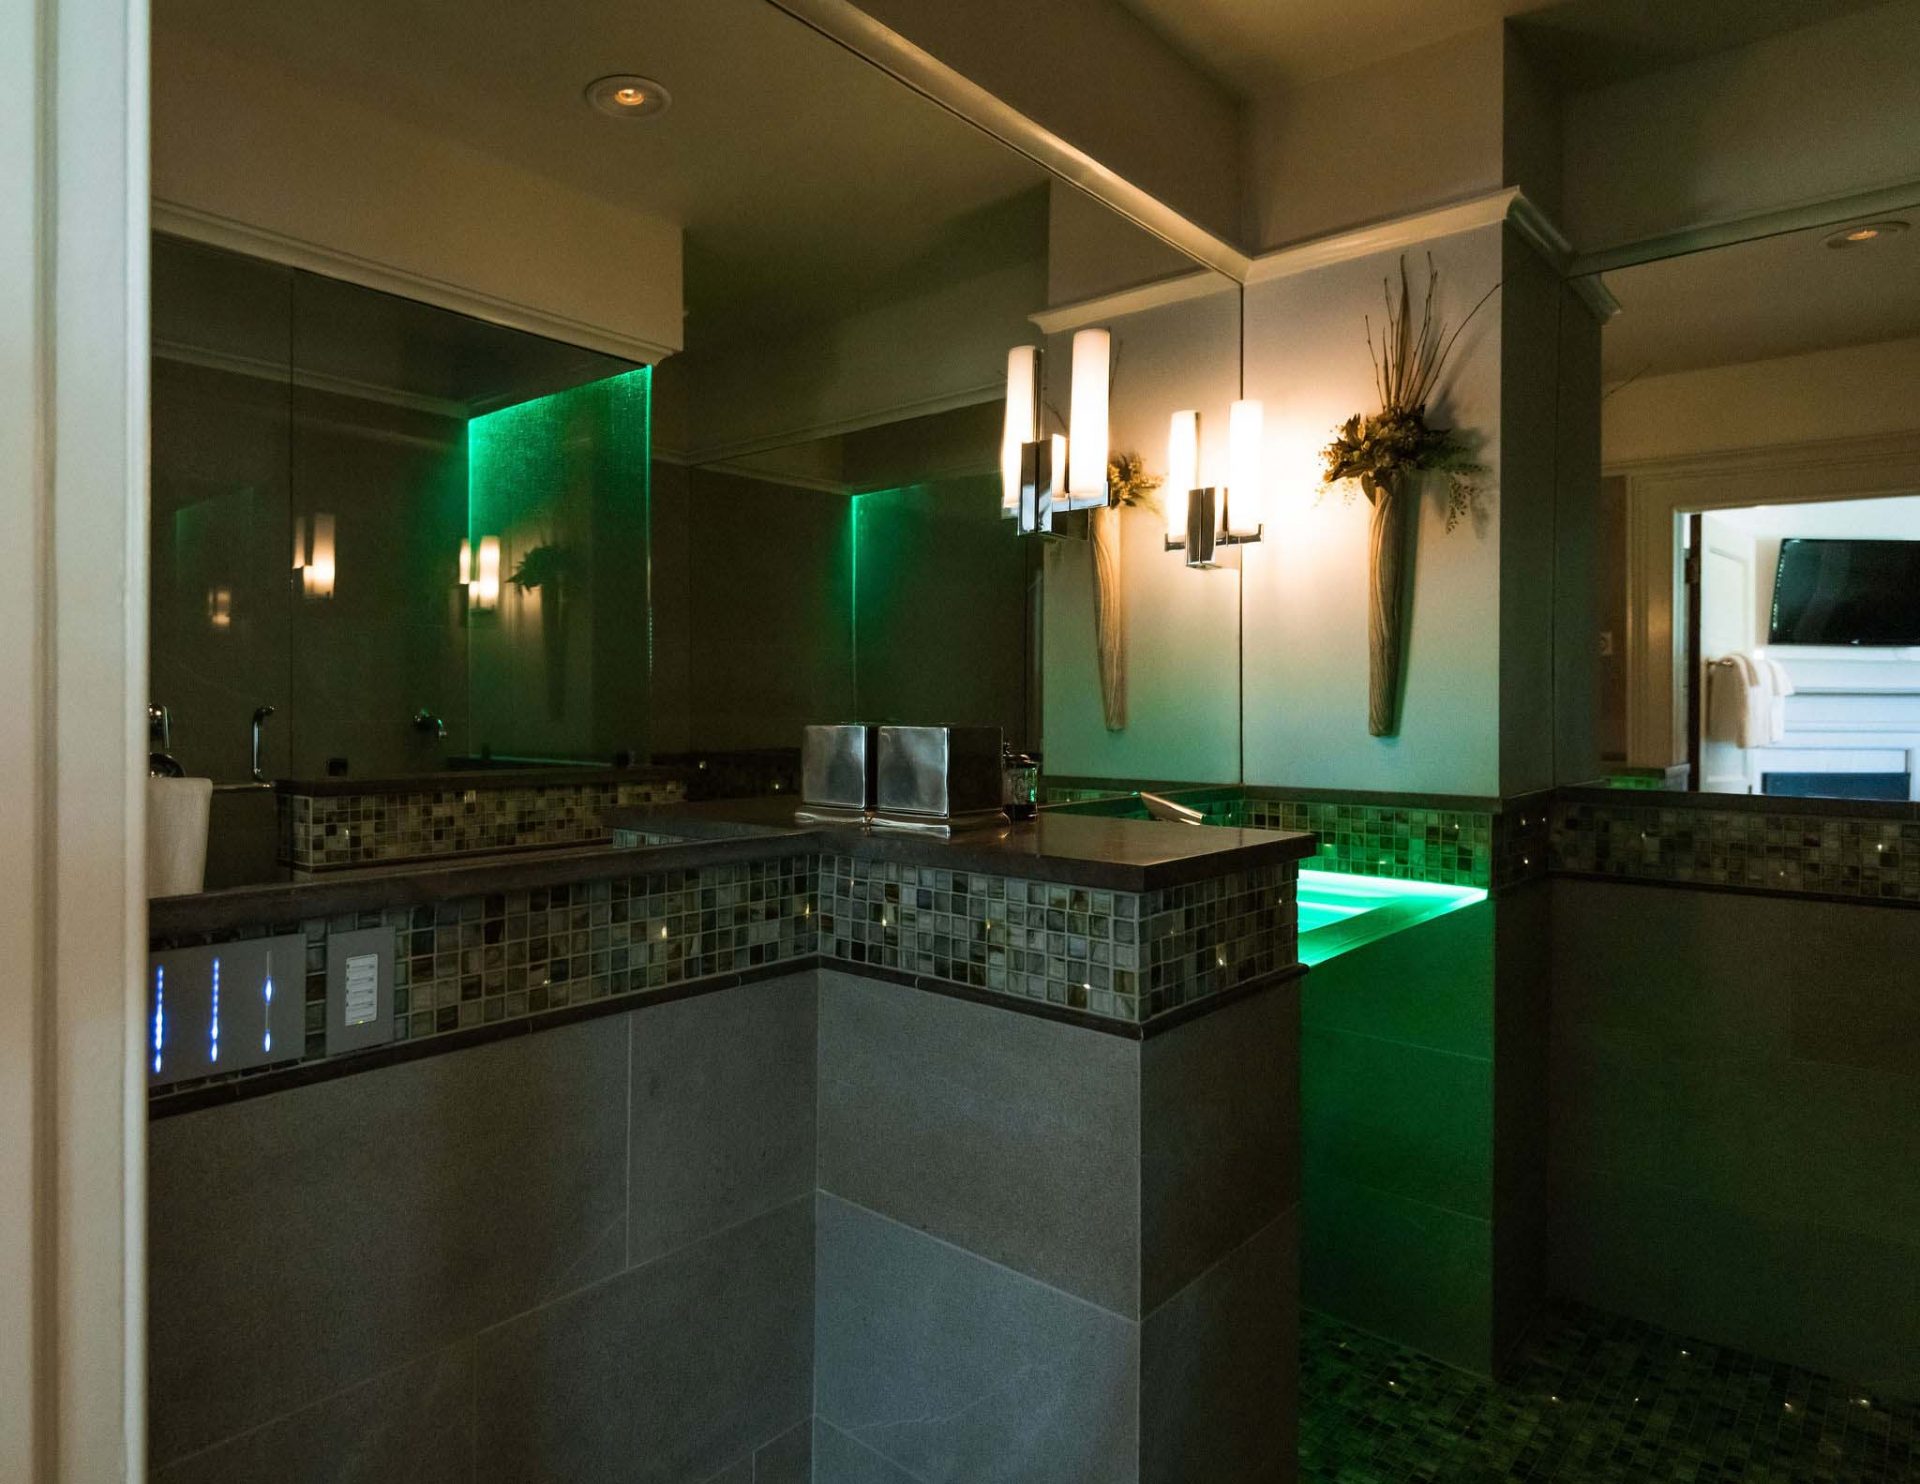 A luxurious bath with colorful fiber optic lighting and a green-lit glass sink, with dimmed lights. Long mirror on the whole wall above the sink.